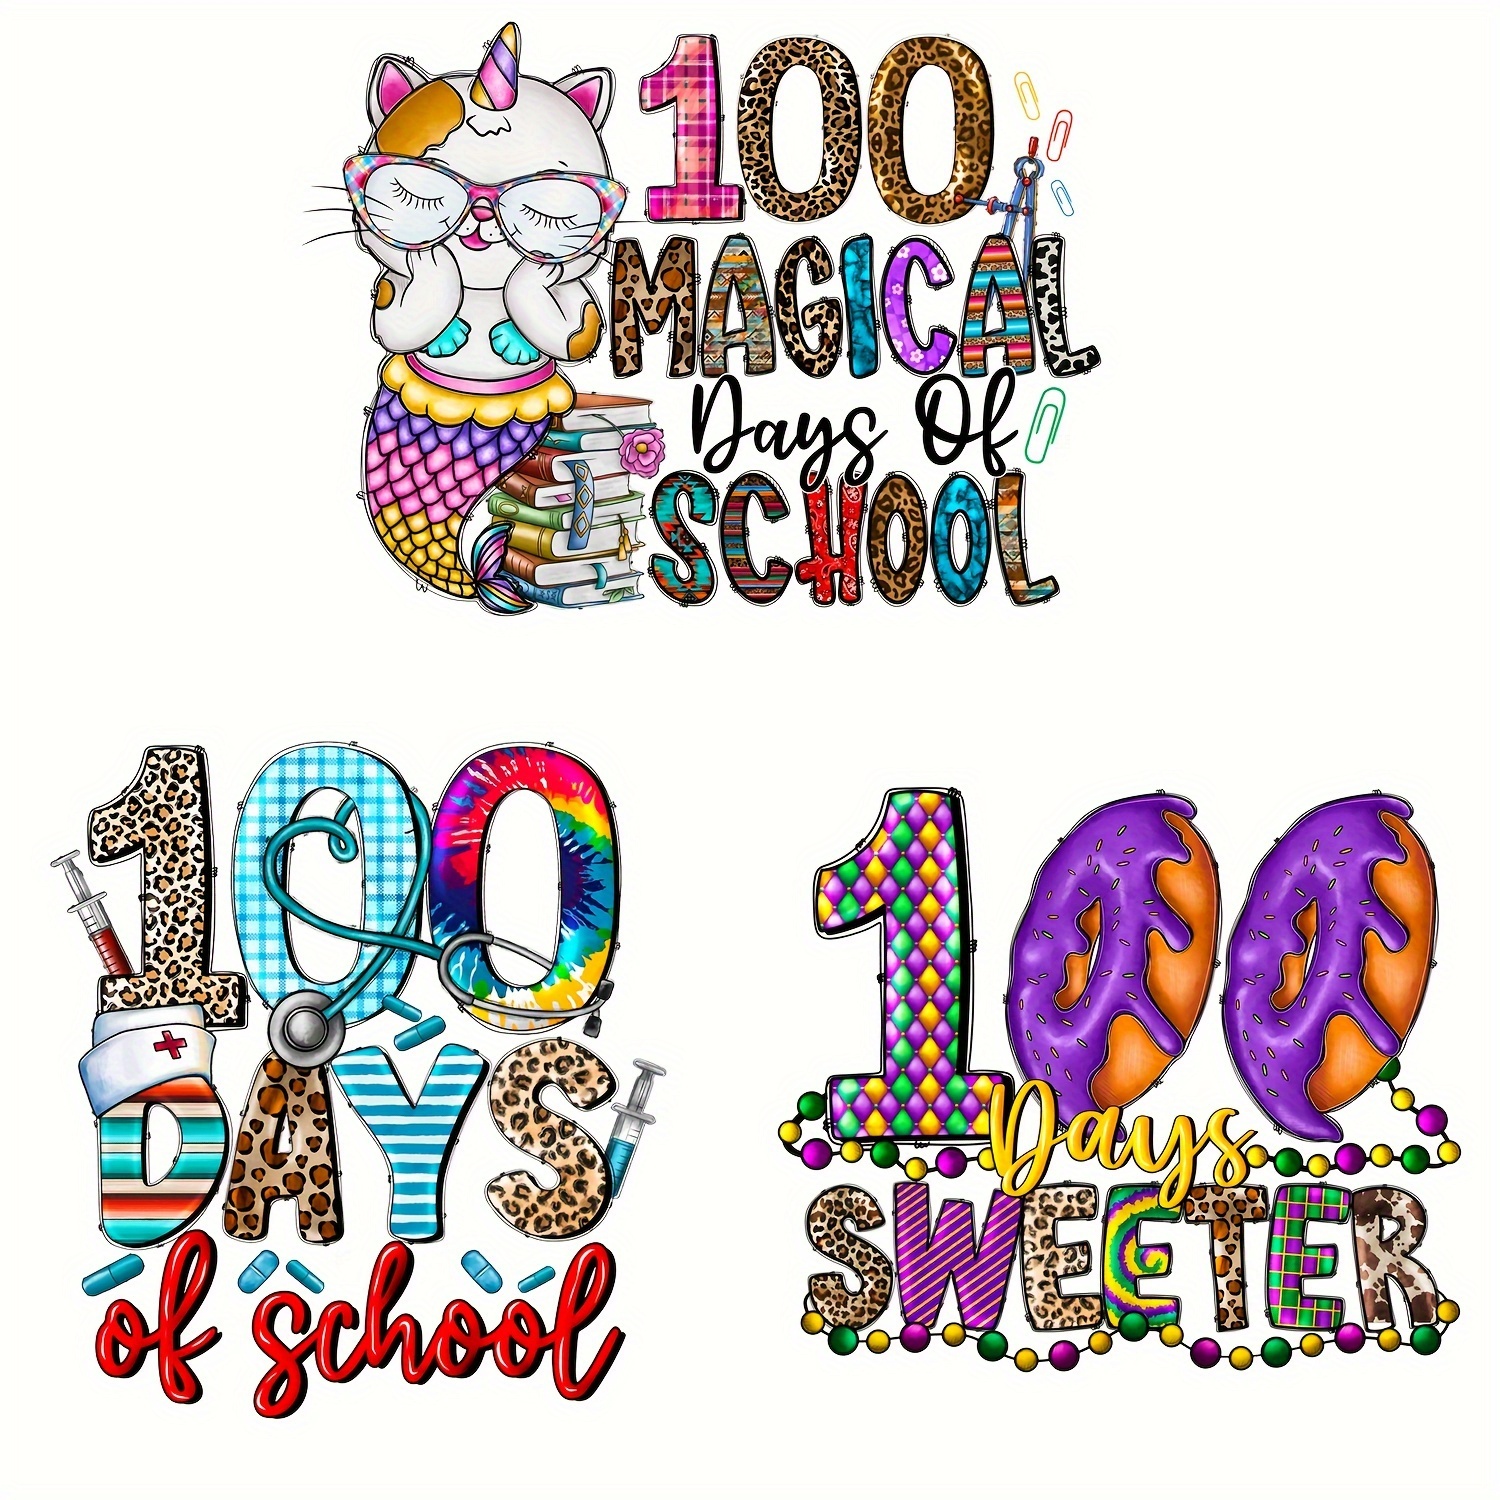  TEHAUX Stickers Heat Transfer Decal Iron on Decals Clothes  Appliques Photo Transfer Paper for Fabric Ready to Press Heat Transfer  Designs Heat Transfer Film Plastic Backpack Patch